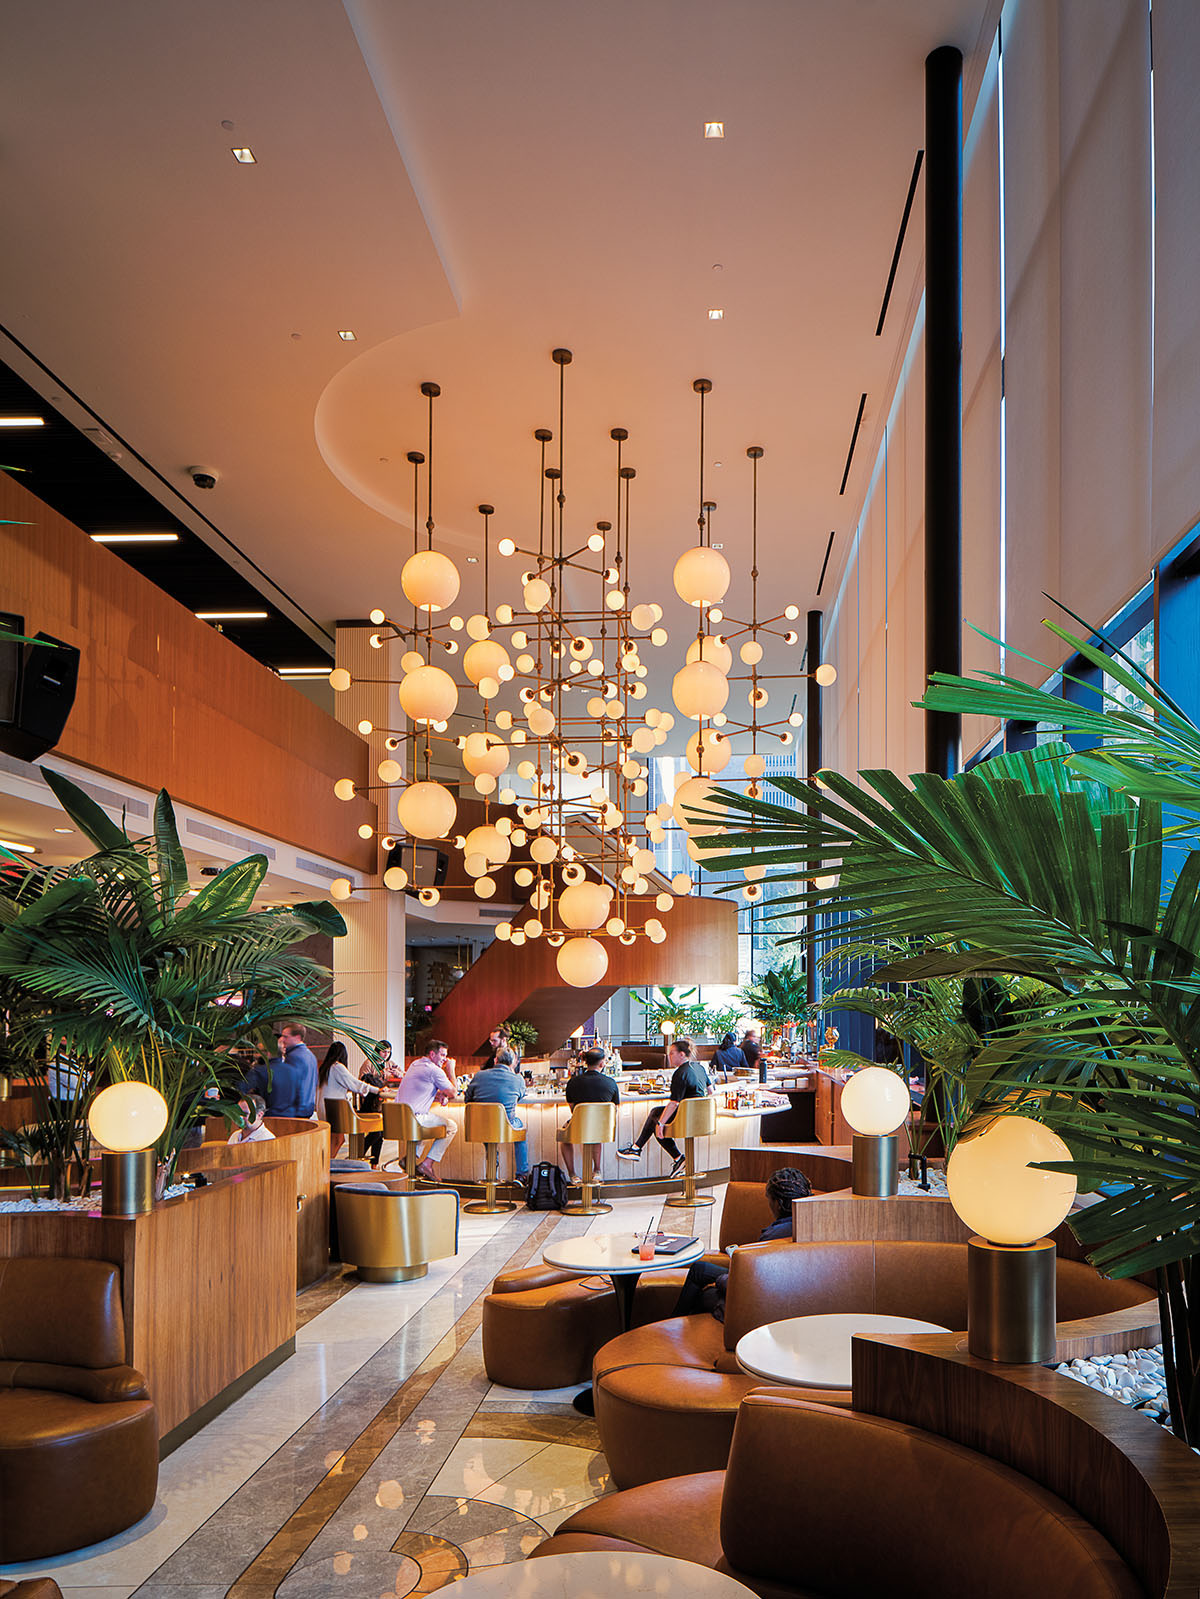 Large globe pendant lights hang from the ceiling of a hotel lobby with large green plants